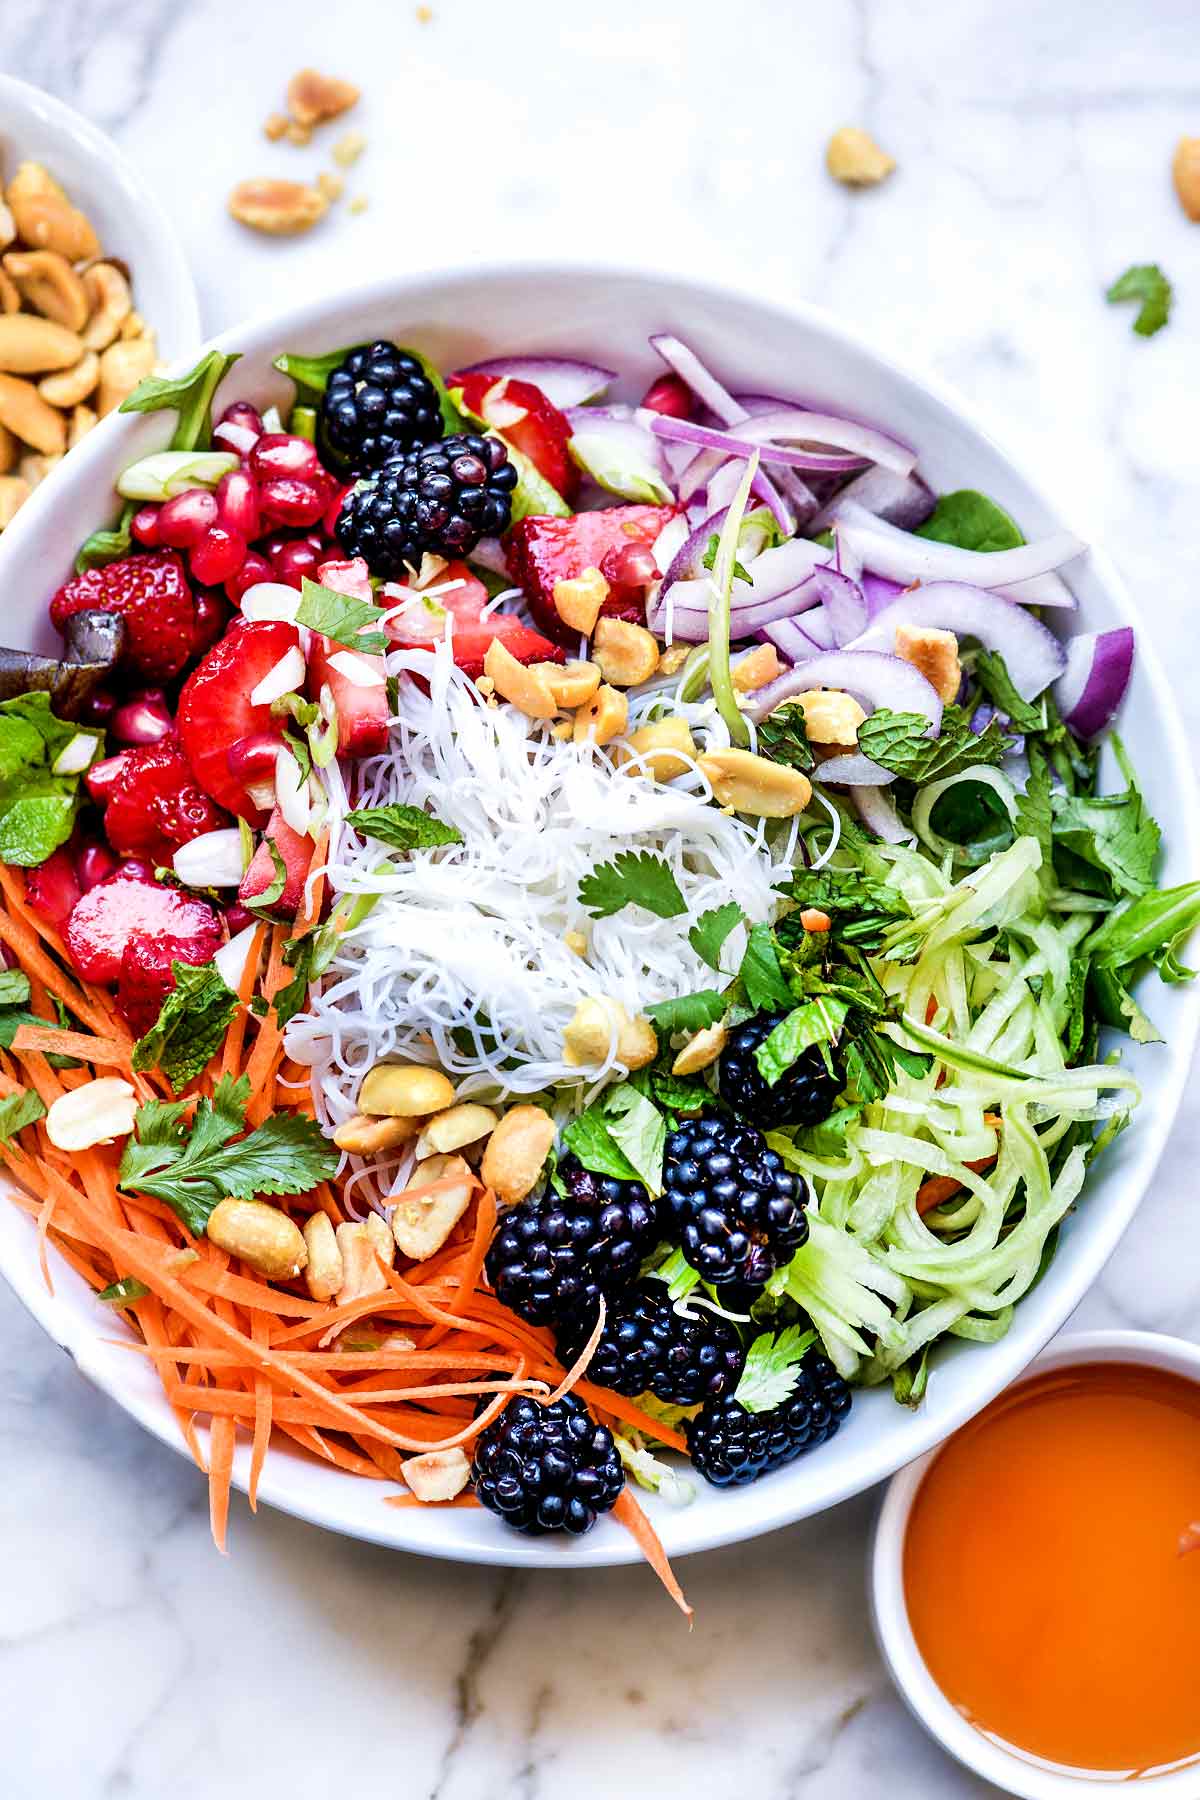 vietnamese noodle salad with berries from foodie crush_healthy bowl recipes